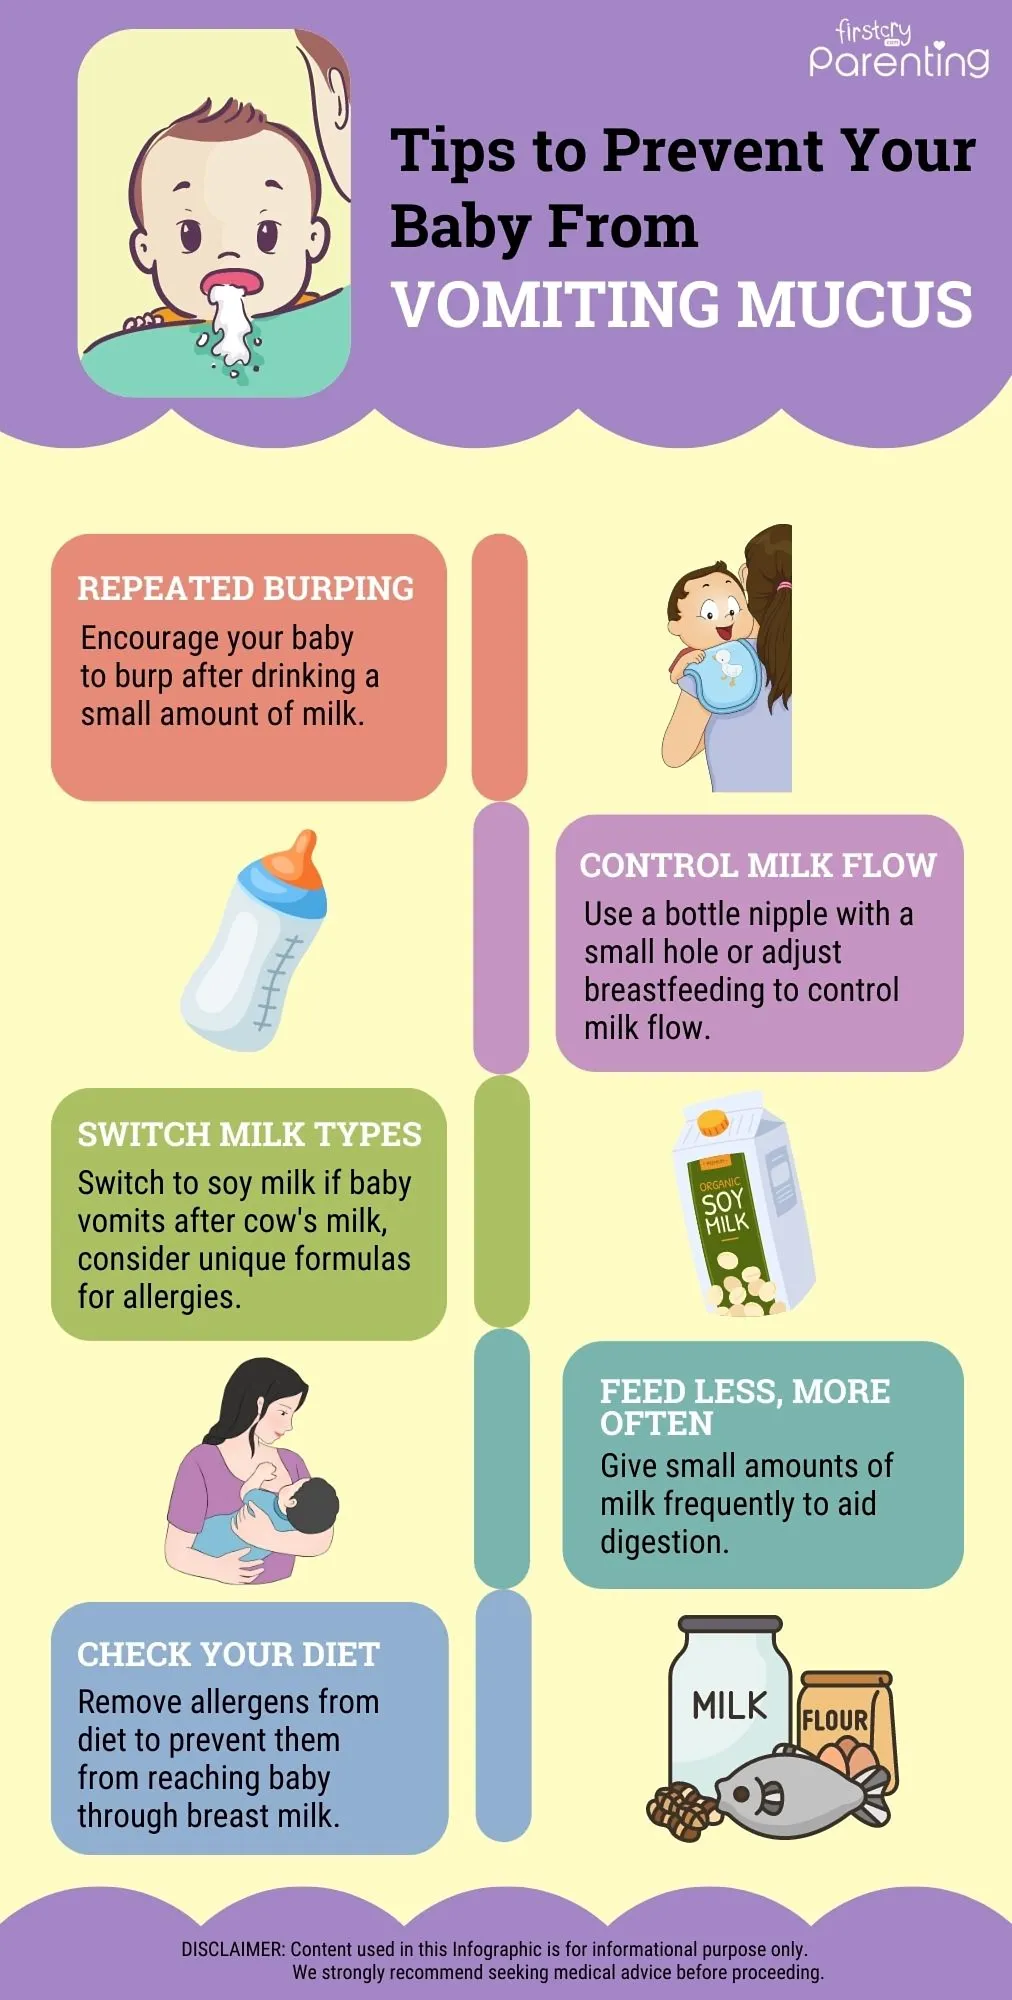 Tips to Prevent Your Baby from Vomiting Mucus - Infographic